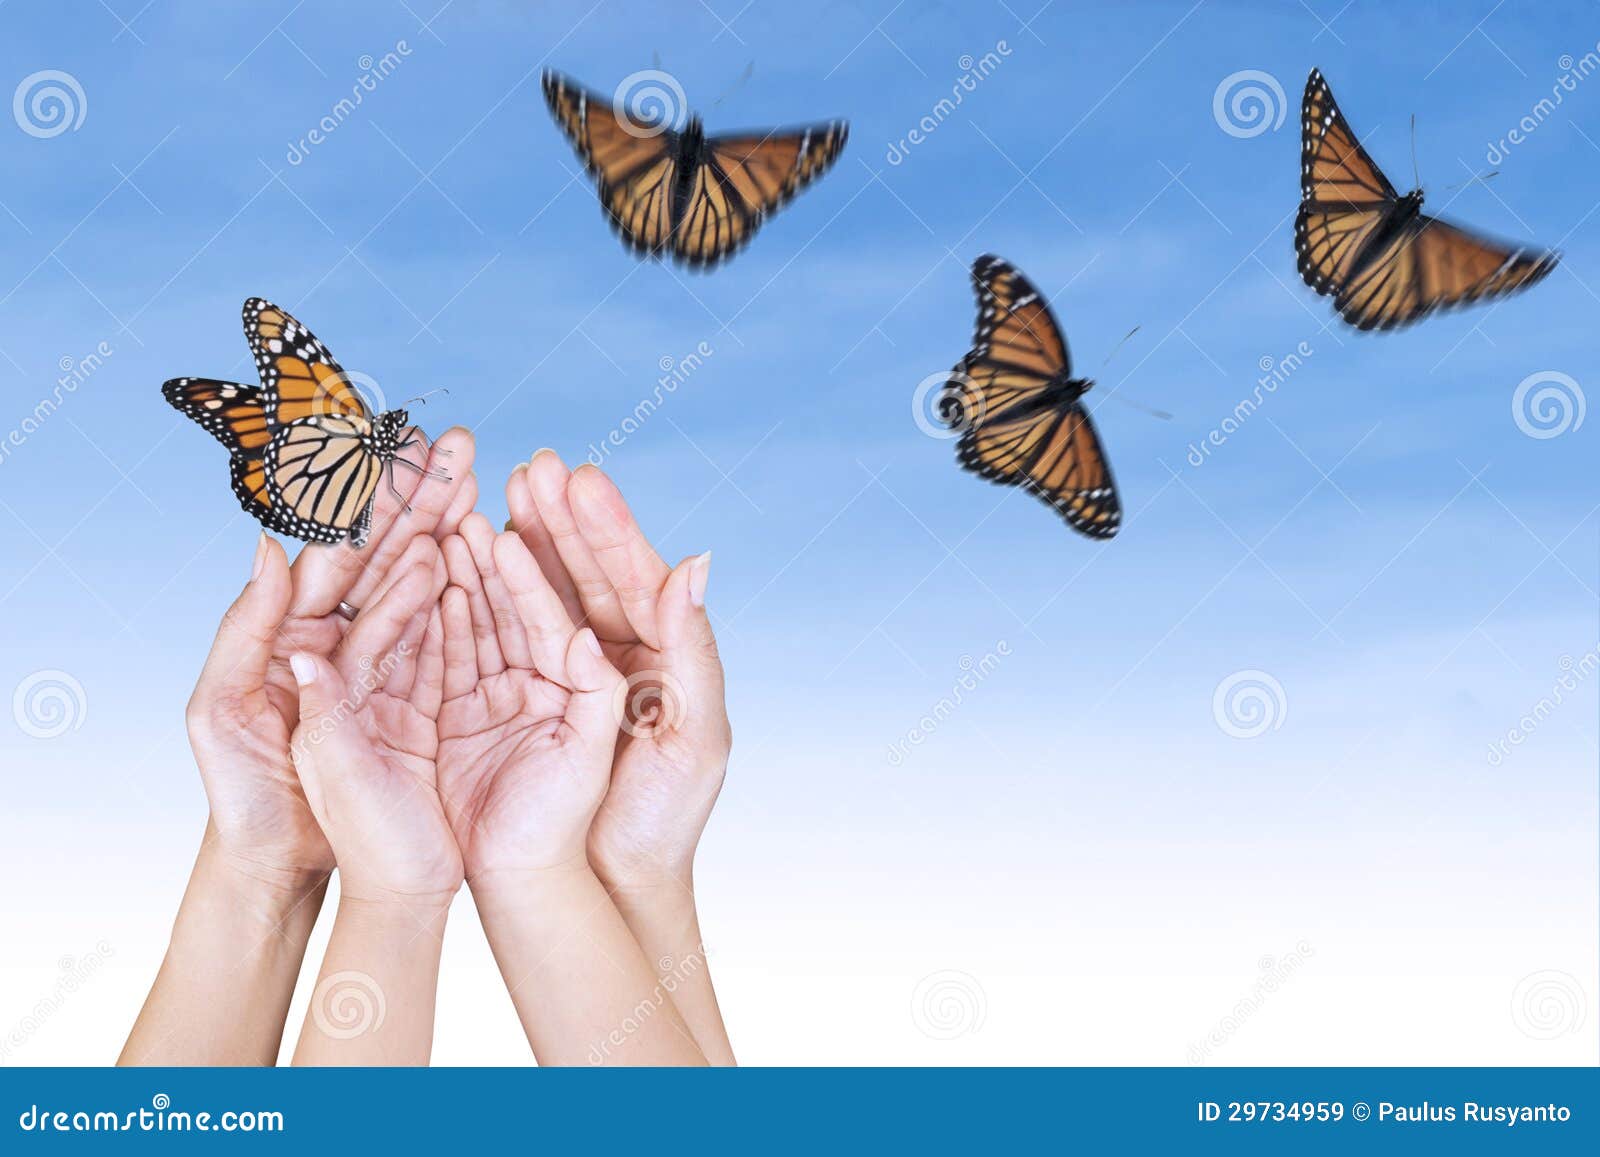 Beautiful Butterfly S and Open Hands Stock Image - Image of health ...